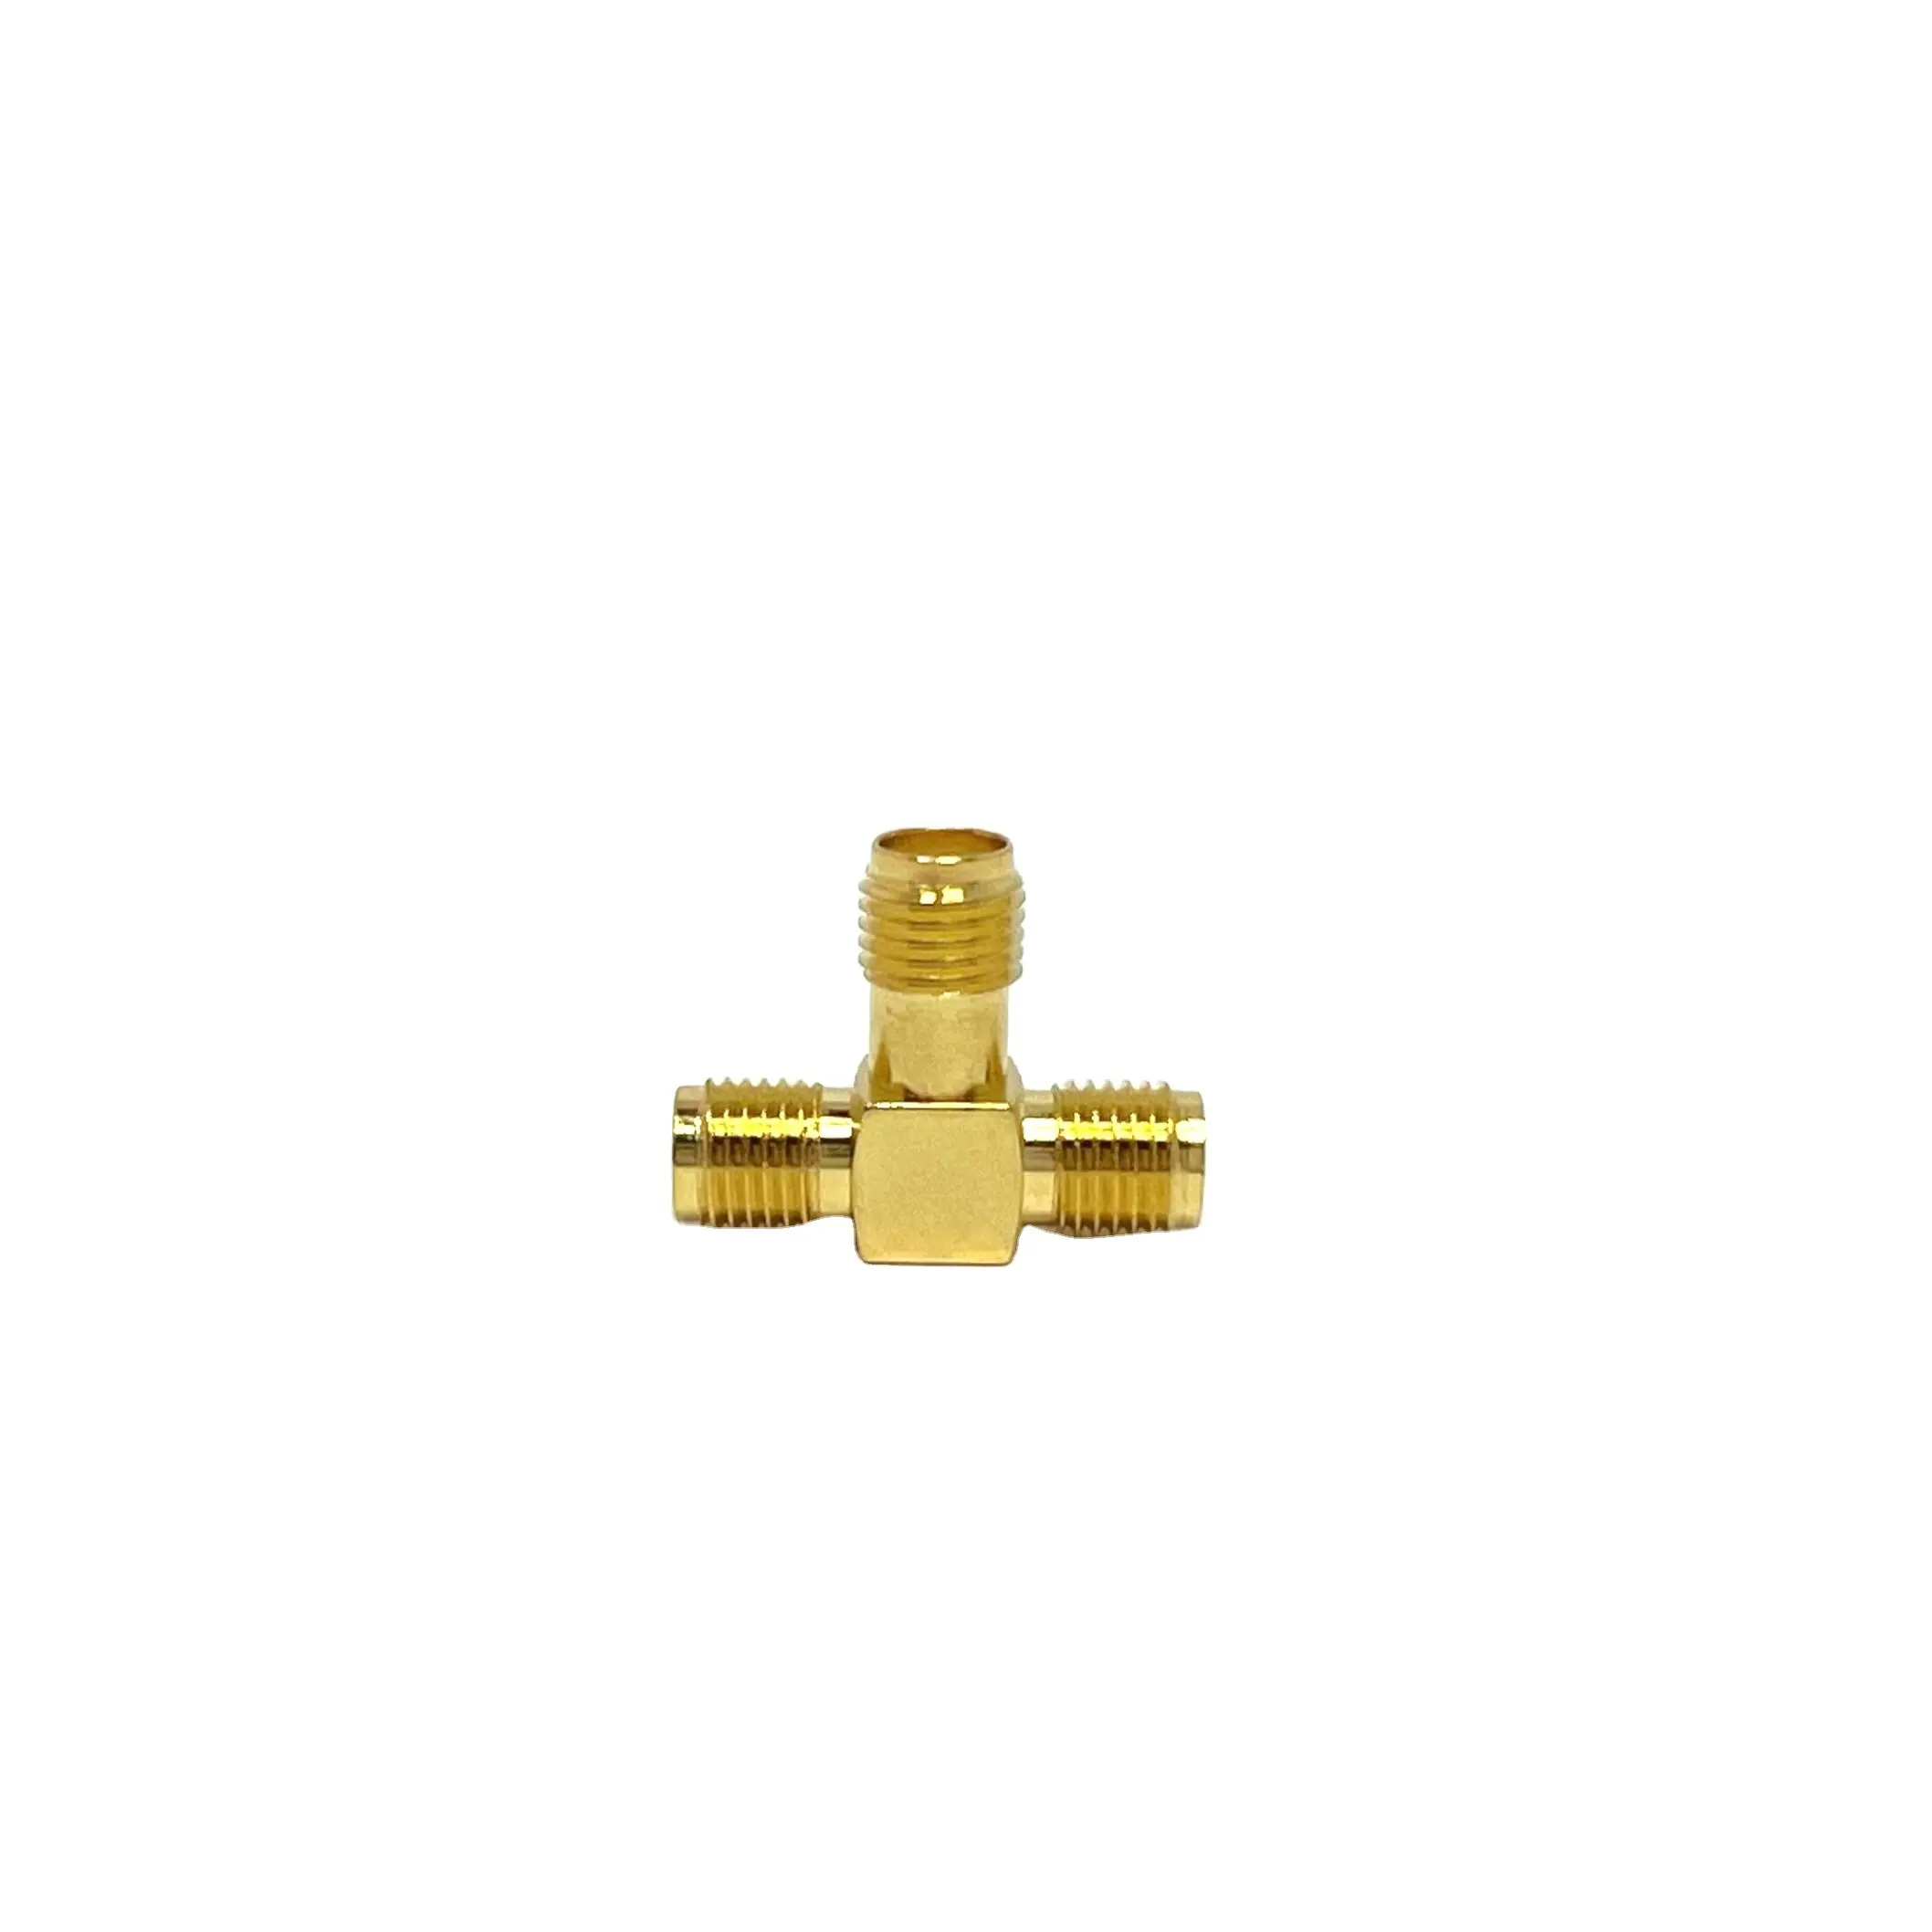 SMA Adapter SMA Female to Dual SMA Female 3 Way T Type Coaxial Adapter for Wireless Network Router LPWAN WiFi Antenna